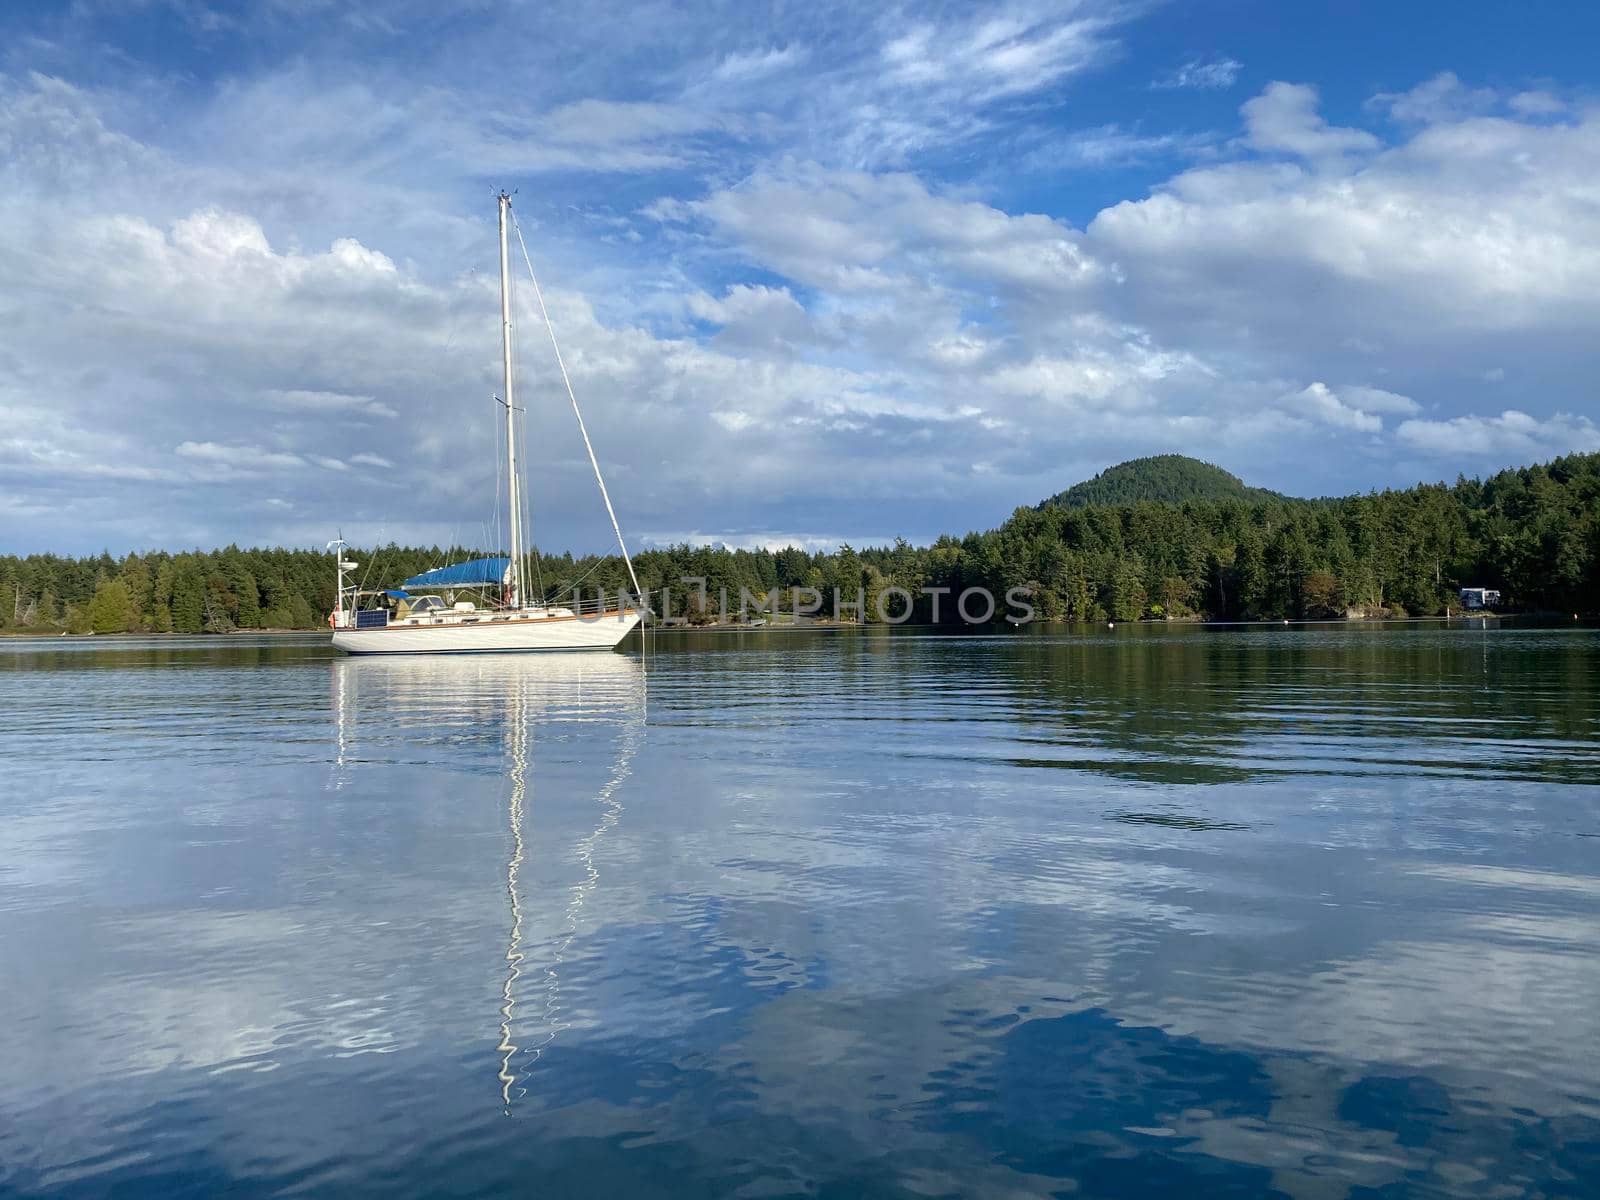 Sailboat in a beautiful and peaceful cove with blue skies. by Granchinho